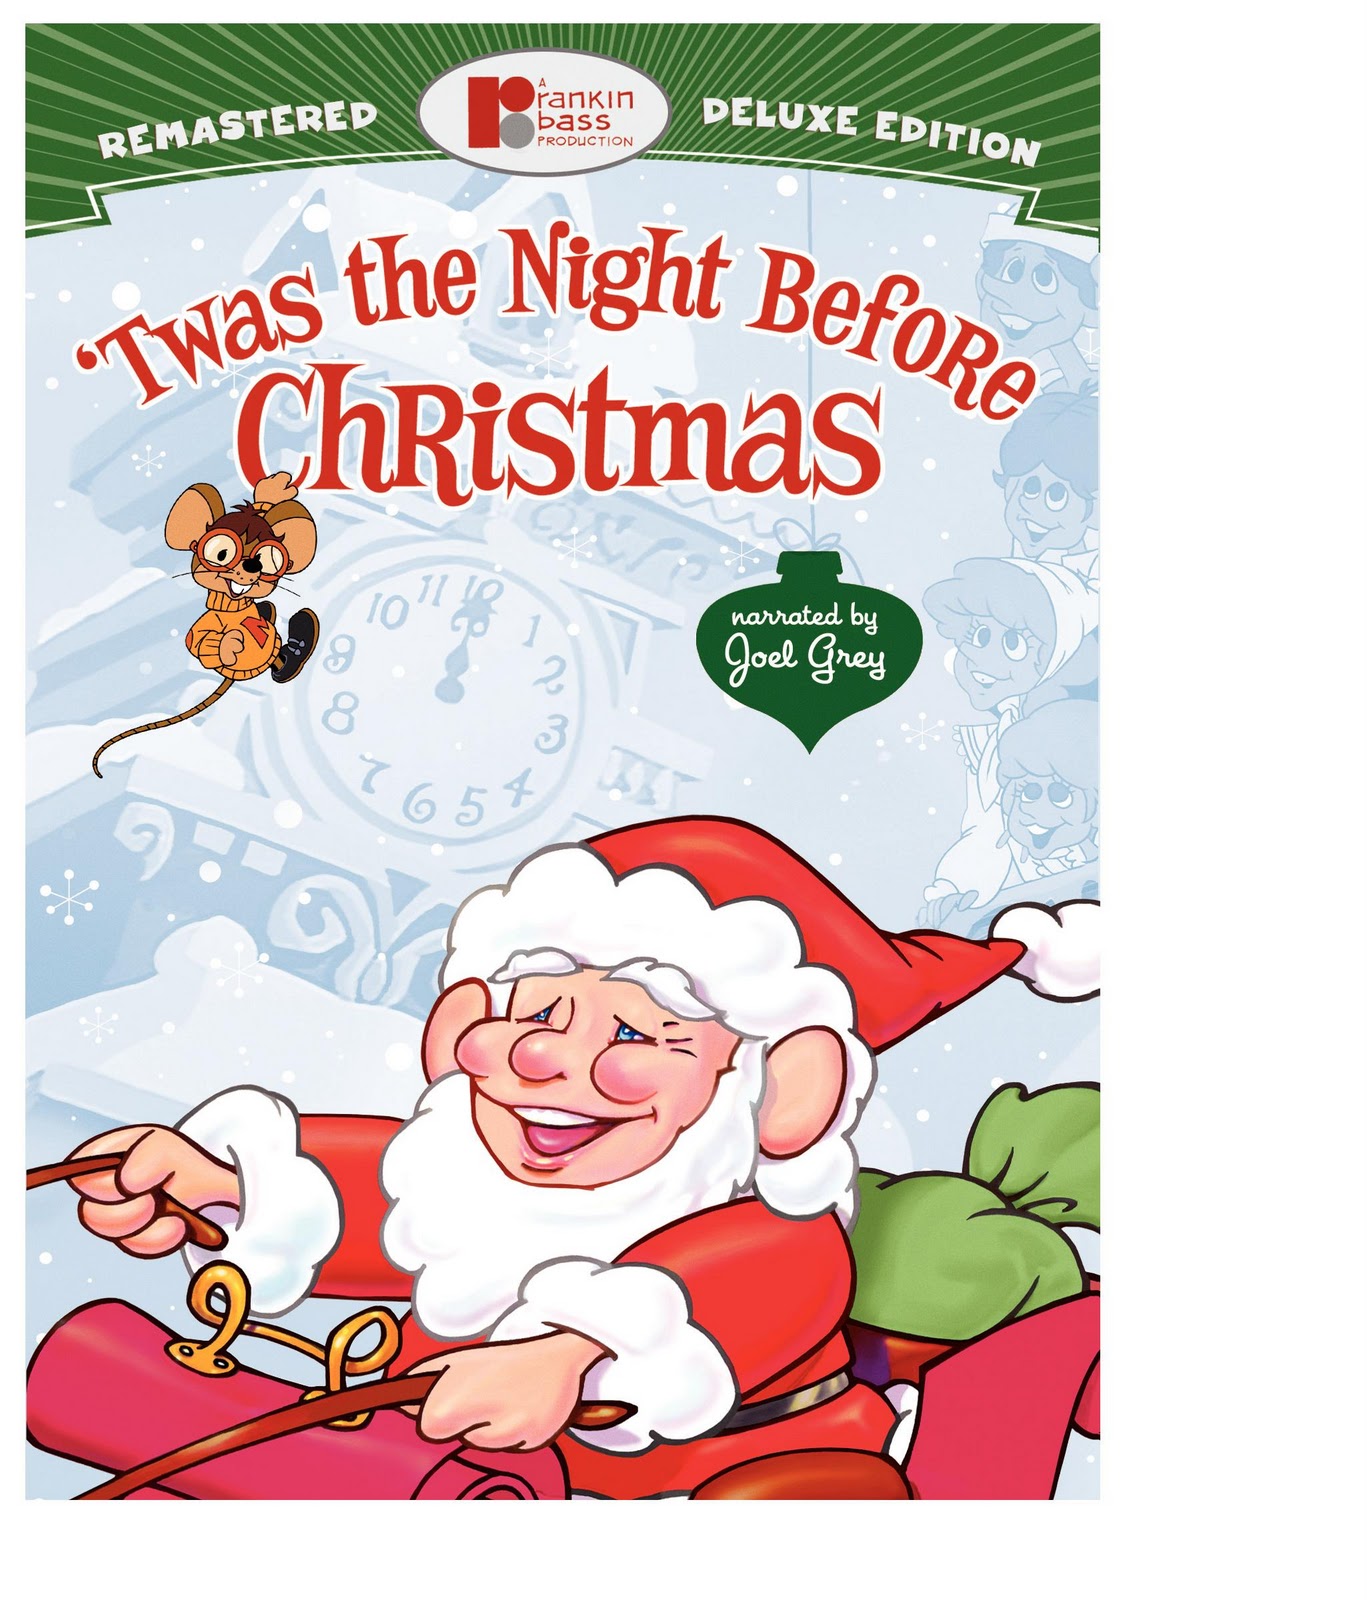 popcultureguy-twas-the-night-before-christmas-remastered-deluxe-edition